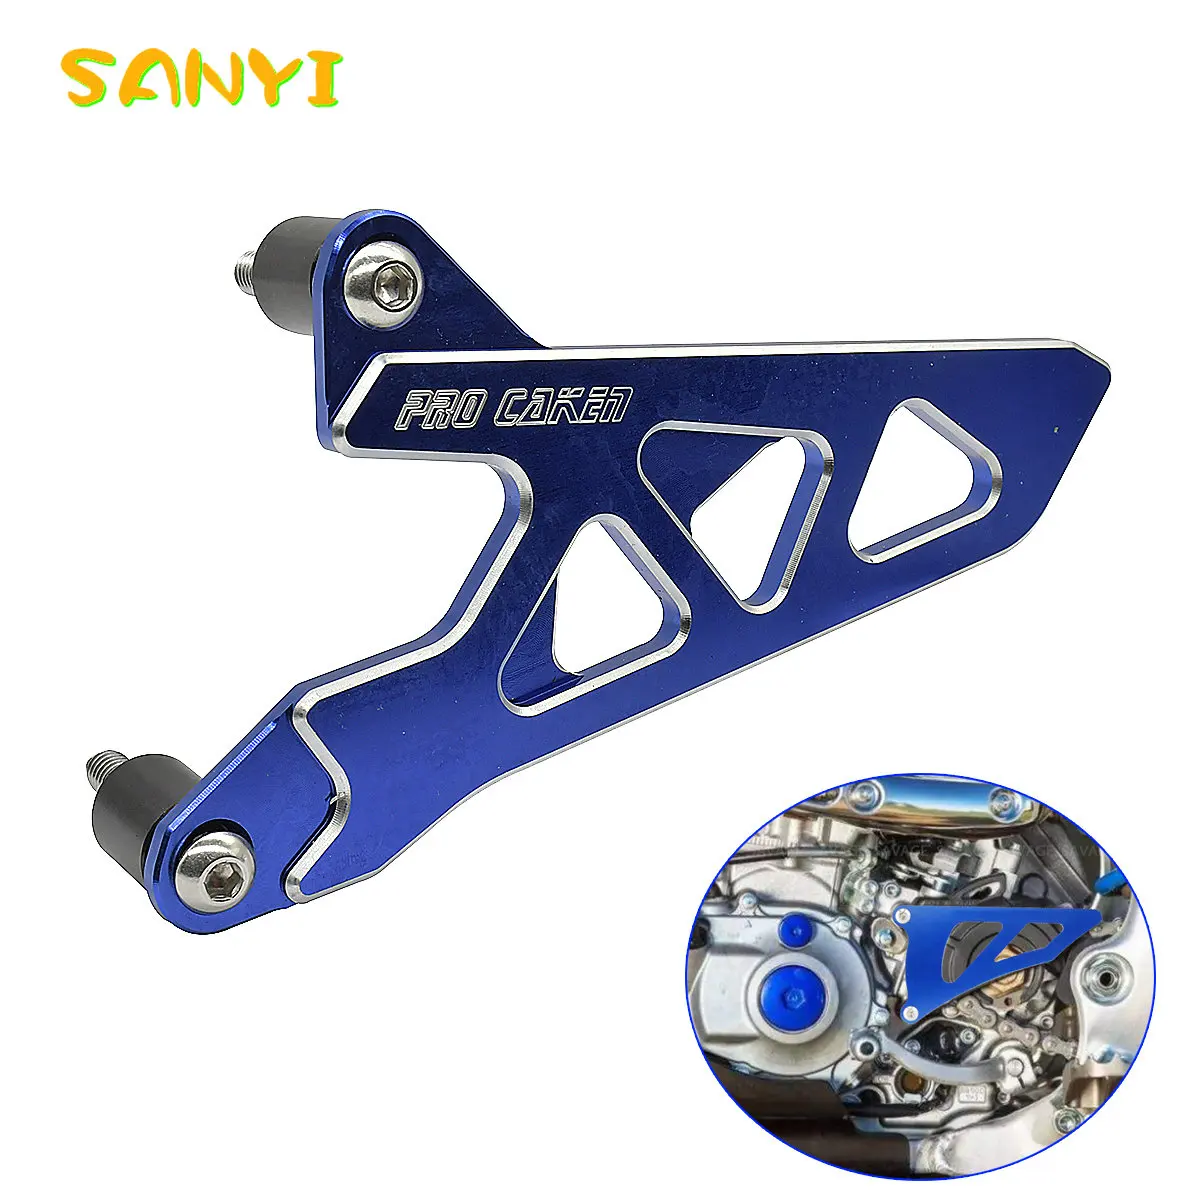 

CNC Front Sprocket Cover Chain Protector Guard For Yamaha YZ250 YZ250F YZ250X WR250F YZ450F WR450F YZ 250 250F 250X WR 450F 450